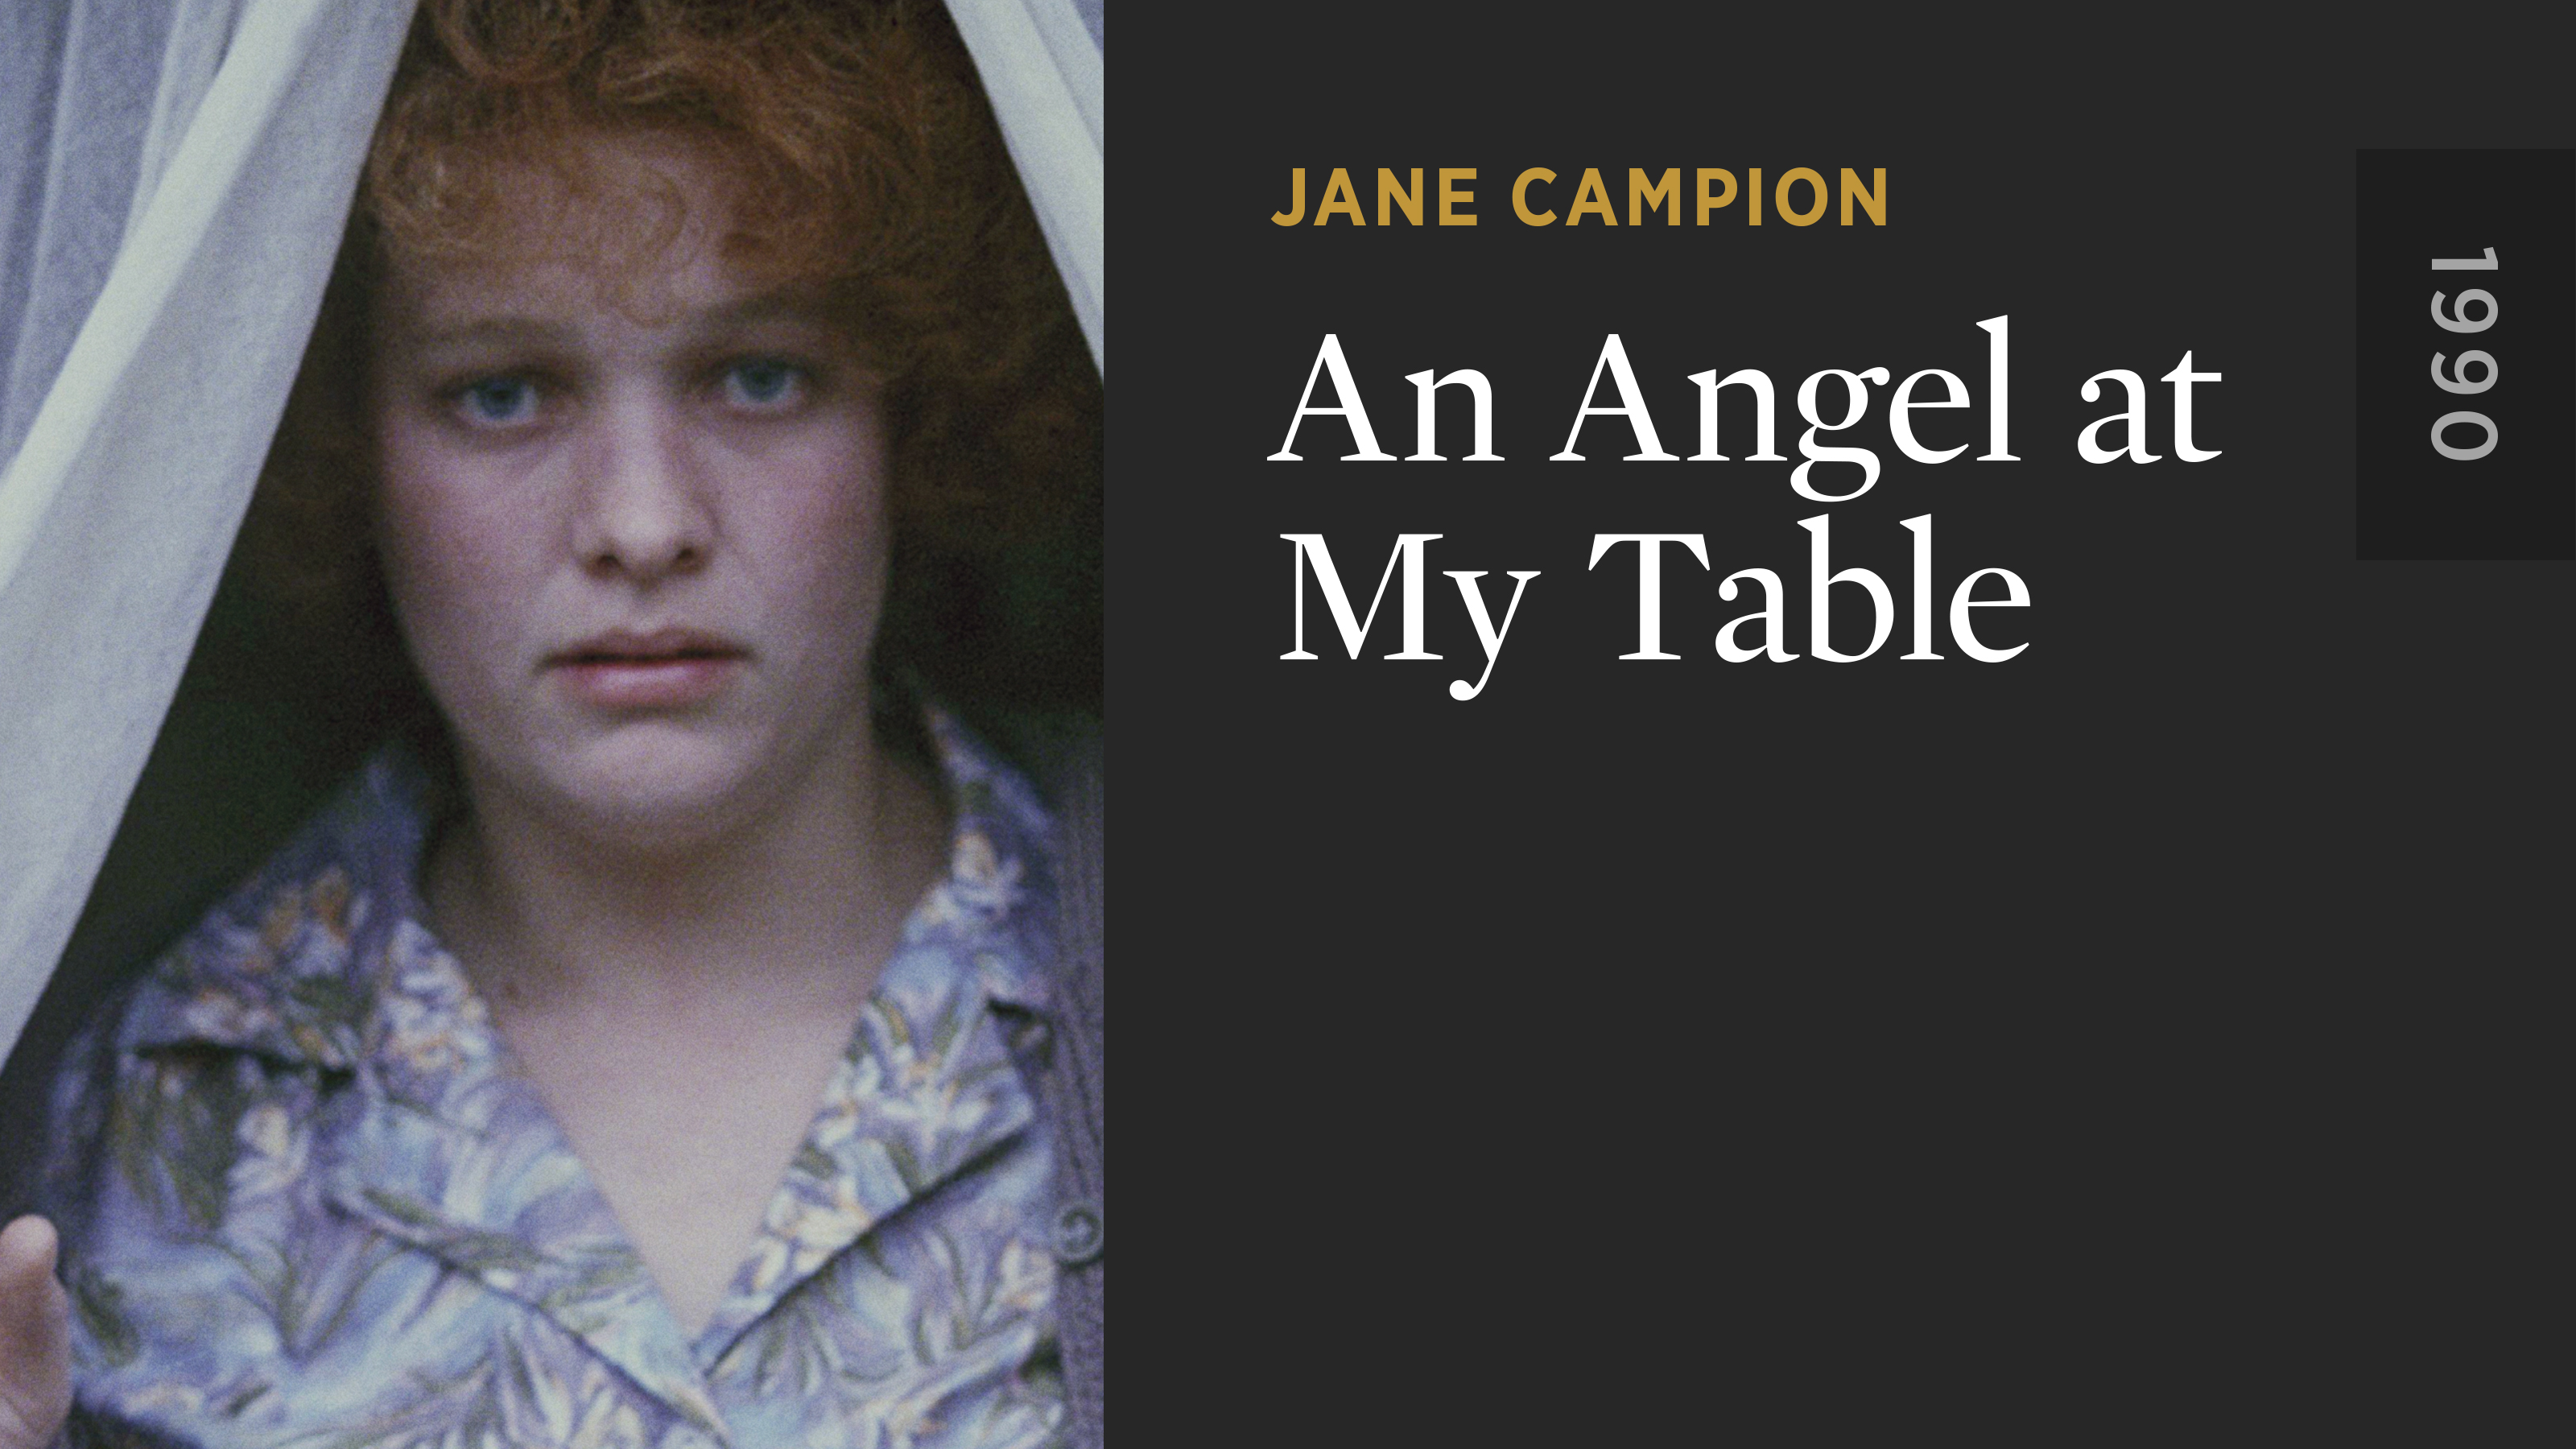 janet frame an angel at my table the complete autobiography